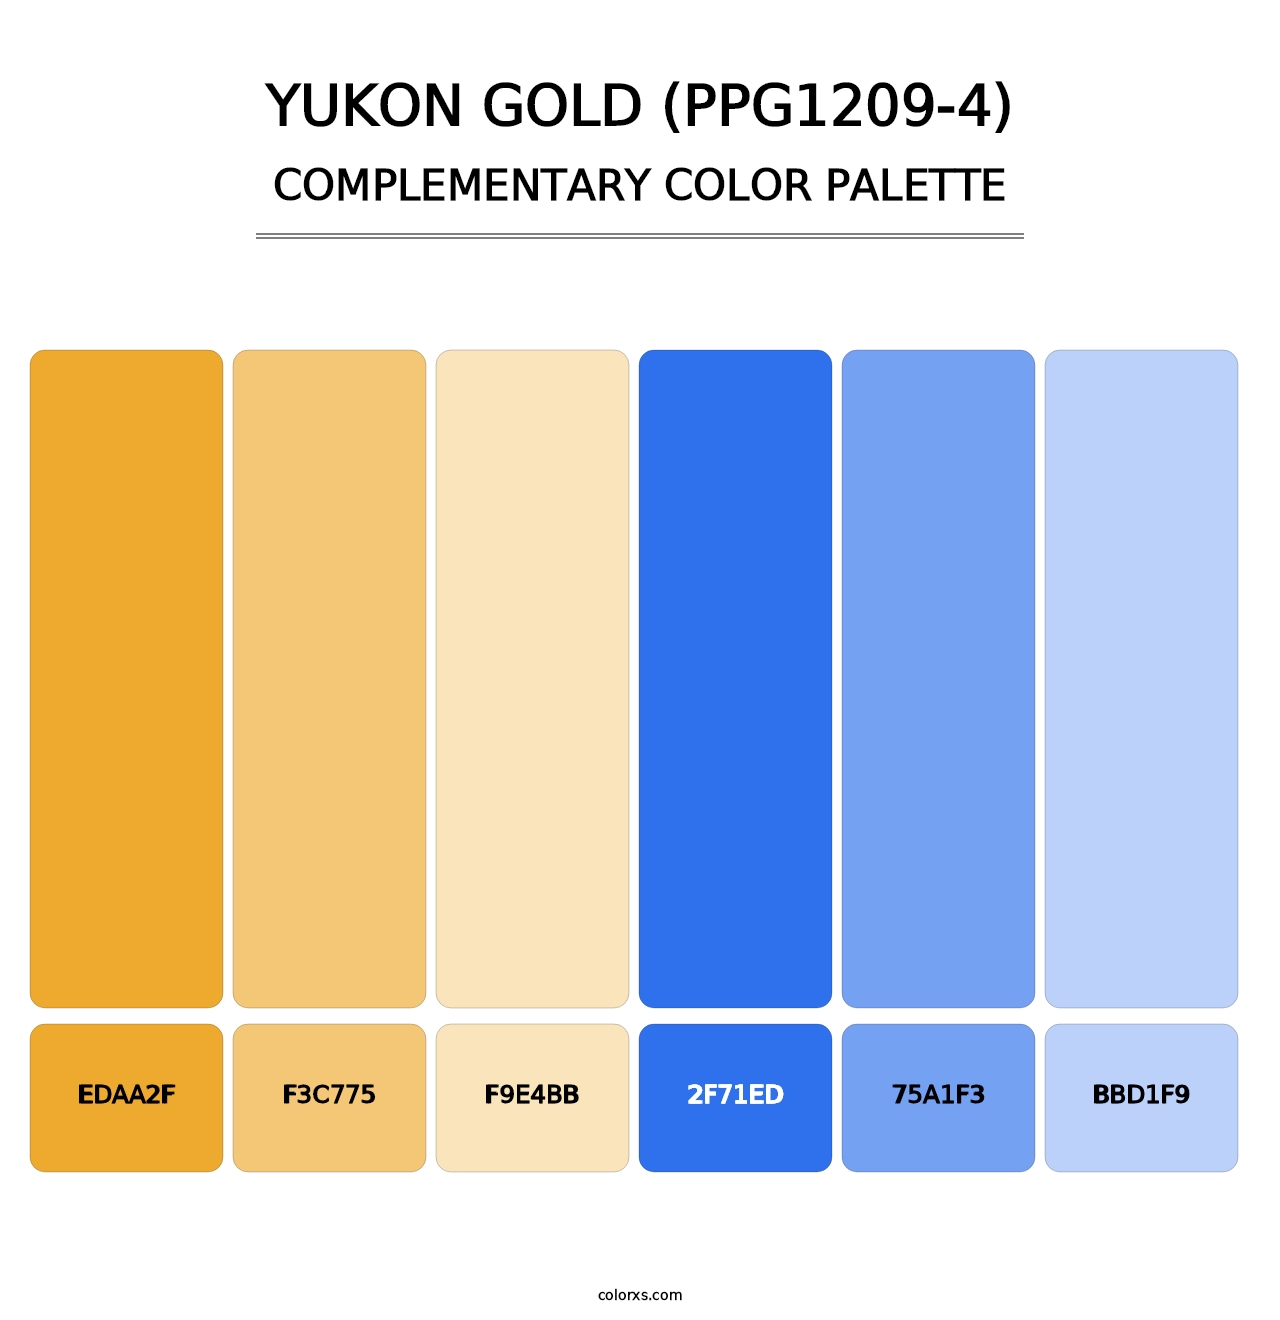 Yukon Gold (PPG1209-4) - Complementary Color Palette